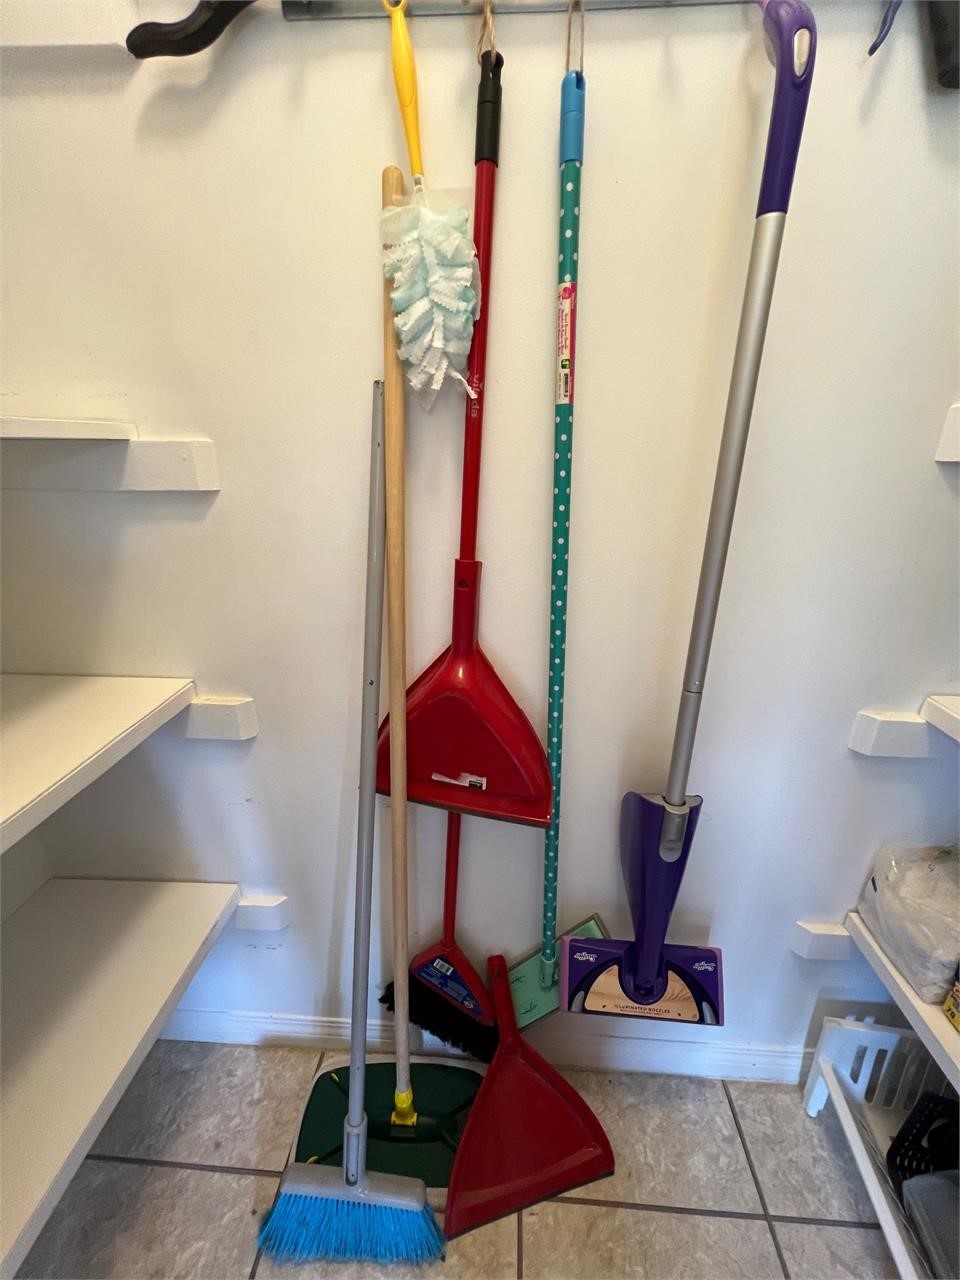 Mop and Brooms